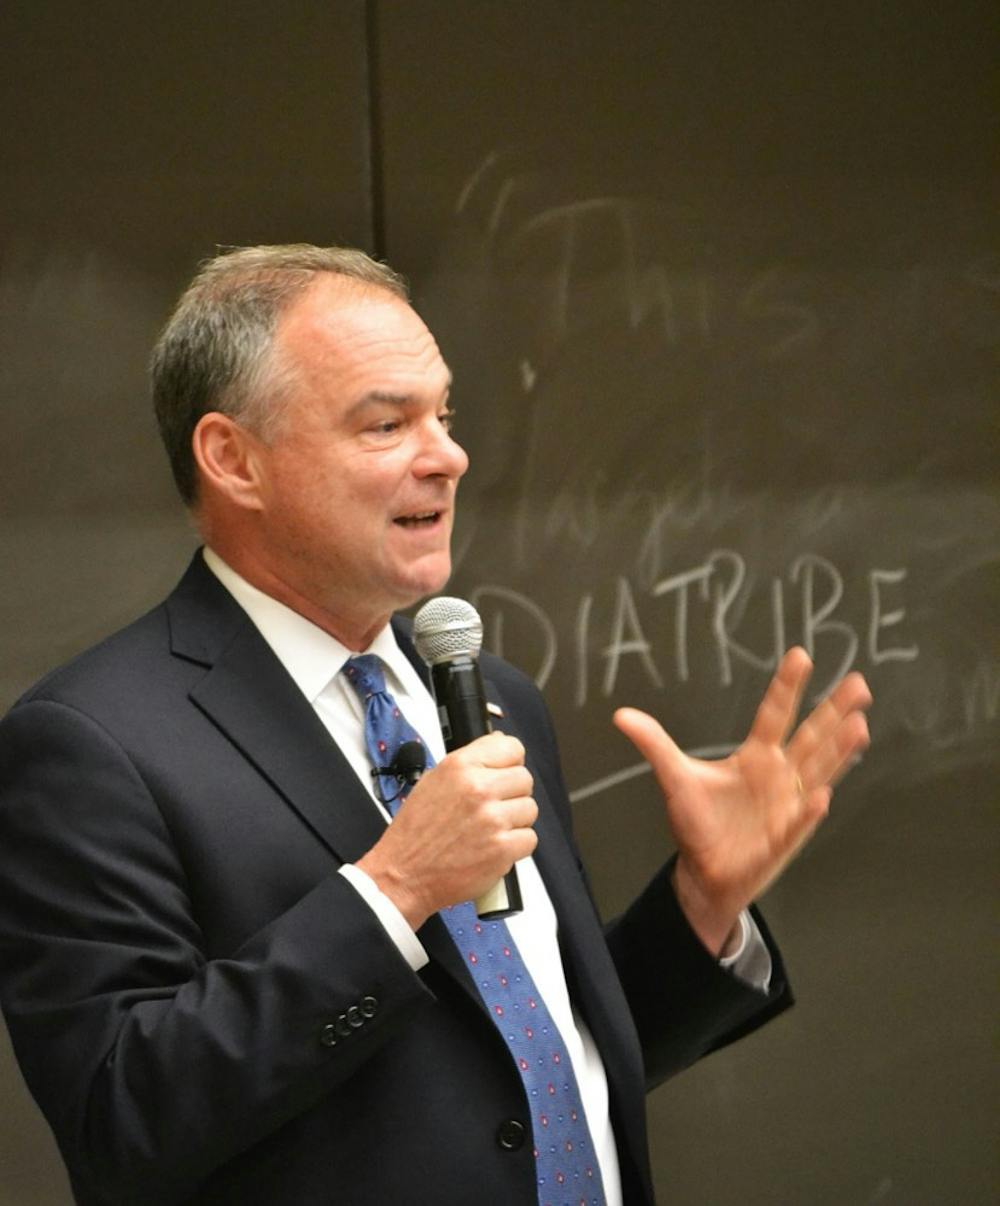 <p>The Equal Access to Justice for Victims of Gun Violence Act will prevent the gun industry from being shielded from lawsuits “when it acts with negligence and disregard for public safety,” Kaine said in an email statement.</p>